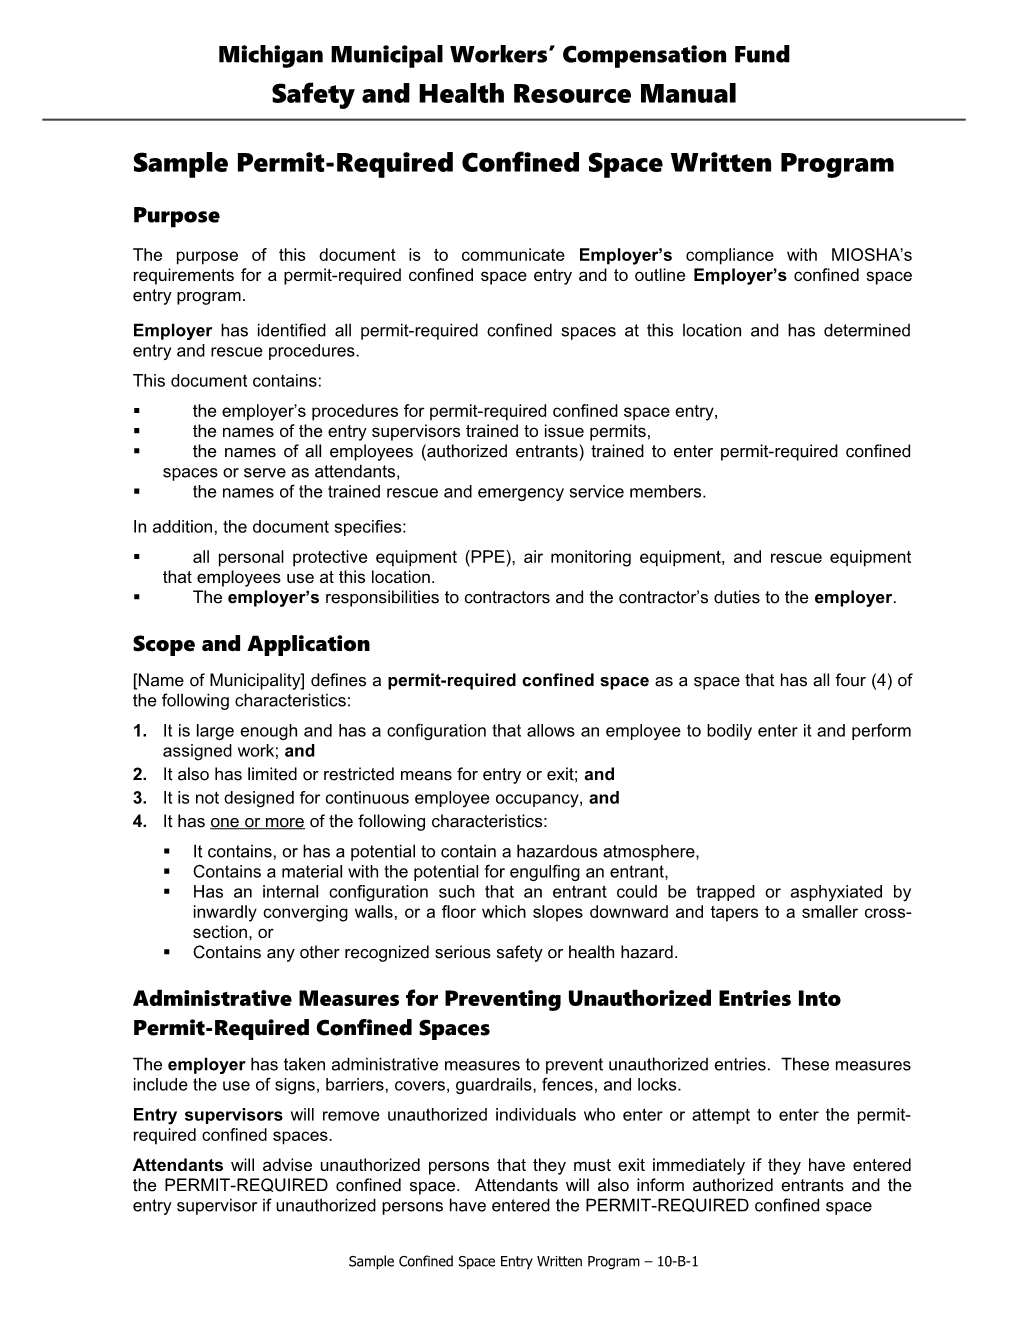 Sample Permit-Required Confined Space Written Program